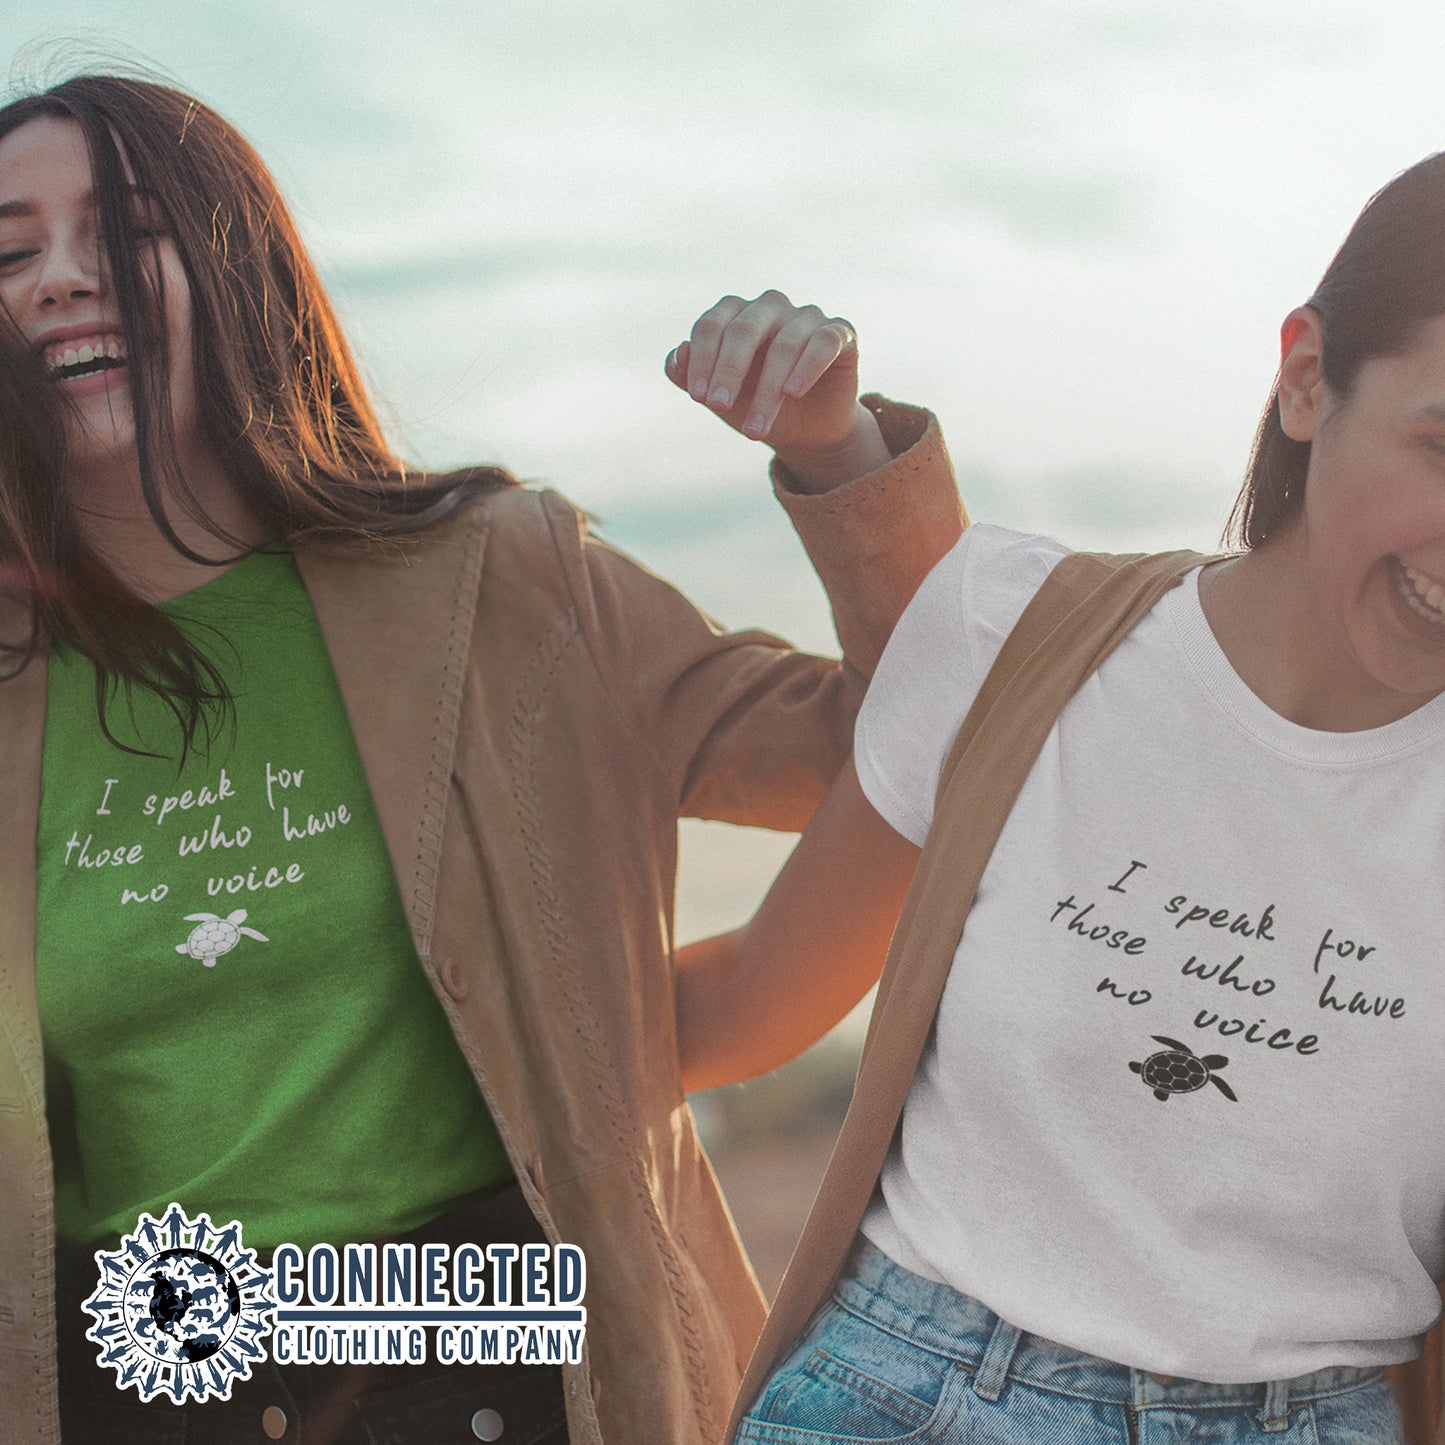 2 Friends Wearing A Kelly Green Be The Voice Sea Turtle Tee reads "I speak for those who have no voice." And A White Tee - sweetsherriloudesigns - Ethically and Sustainably Made - 10% donated to the Sea Turtle Conservancy